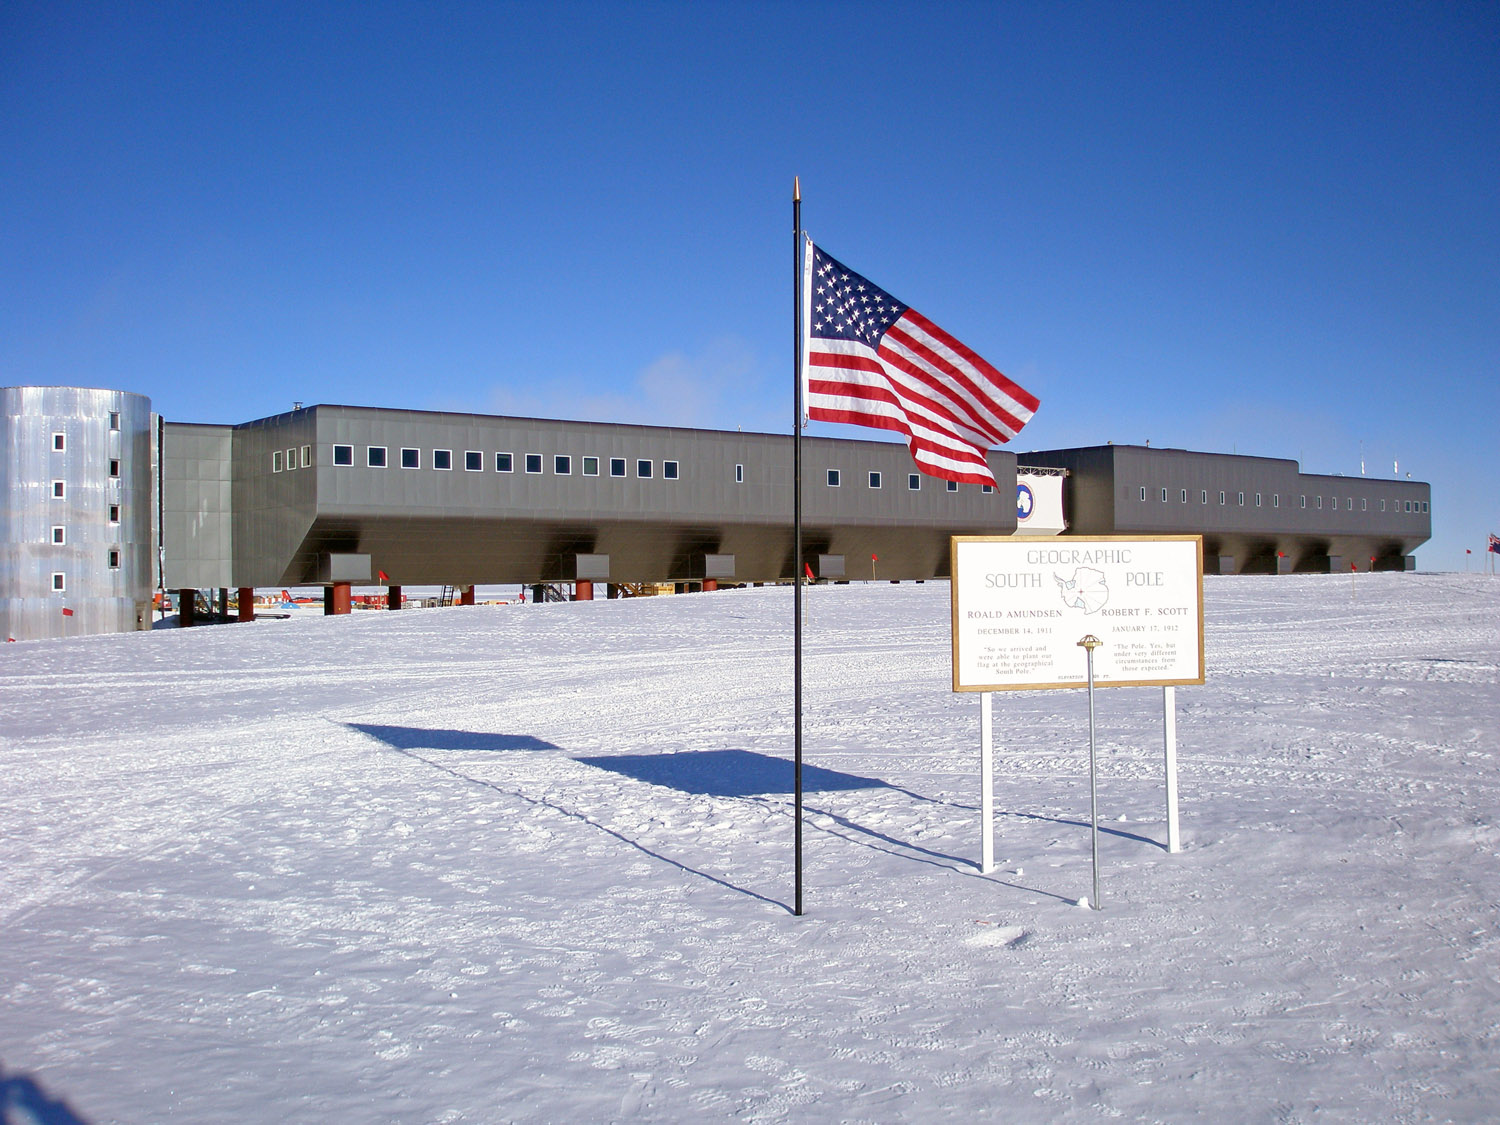 South Pole Station and - Geographic South Pole - 1